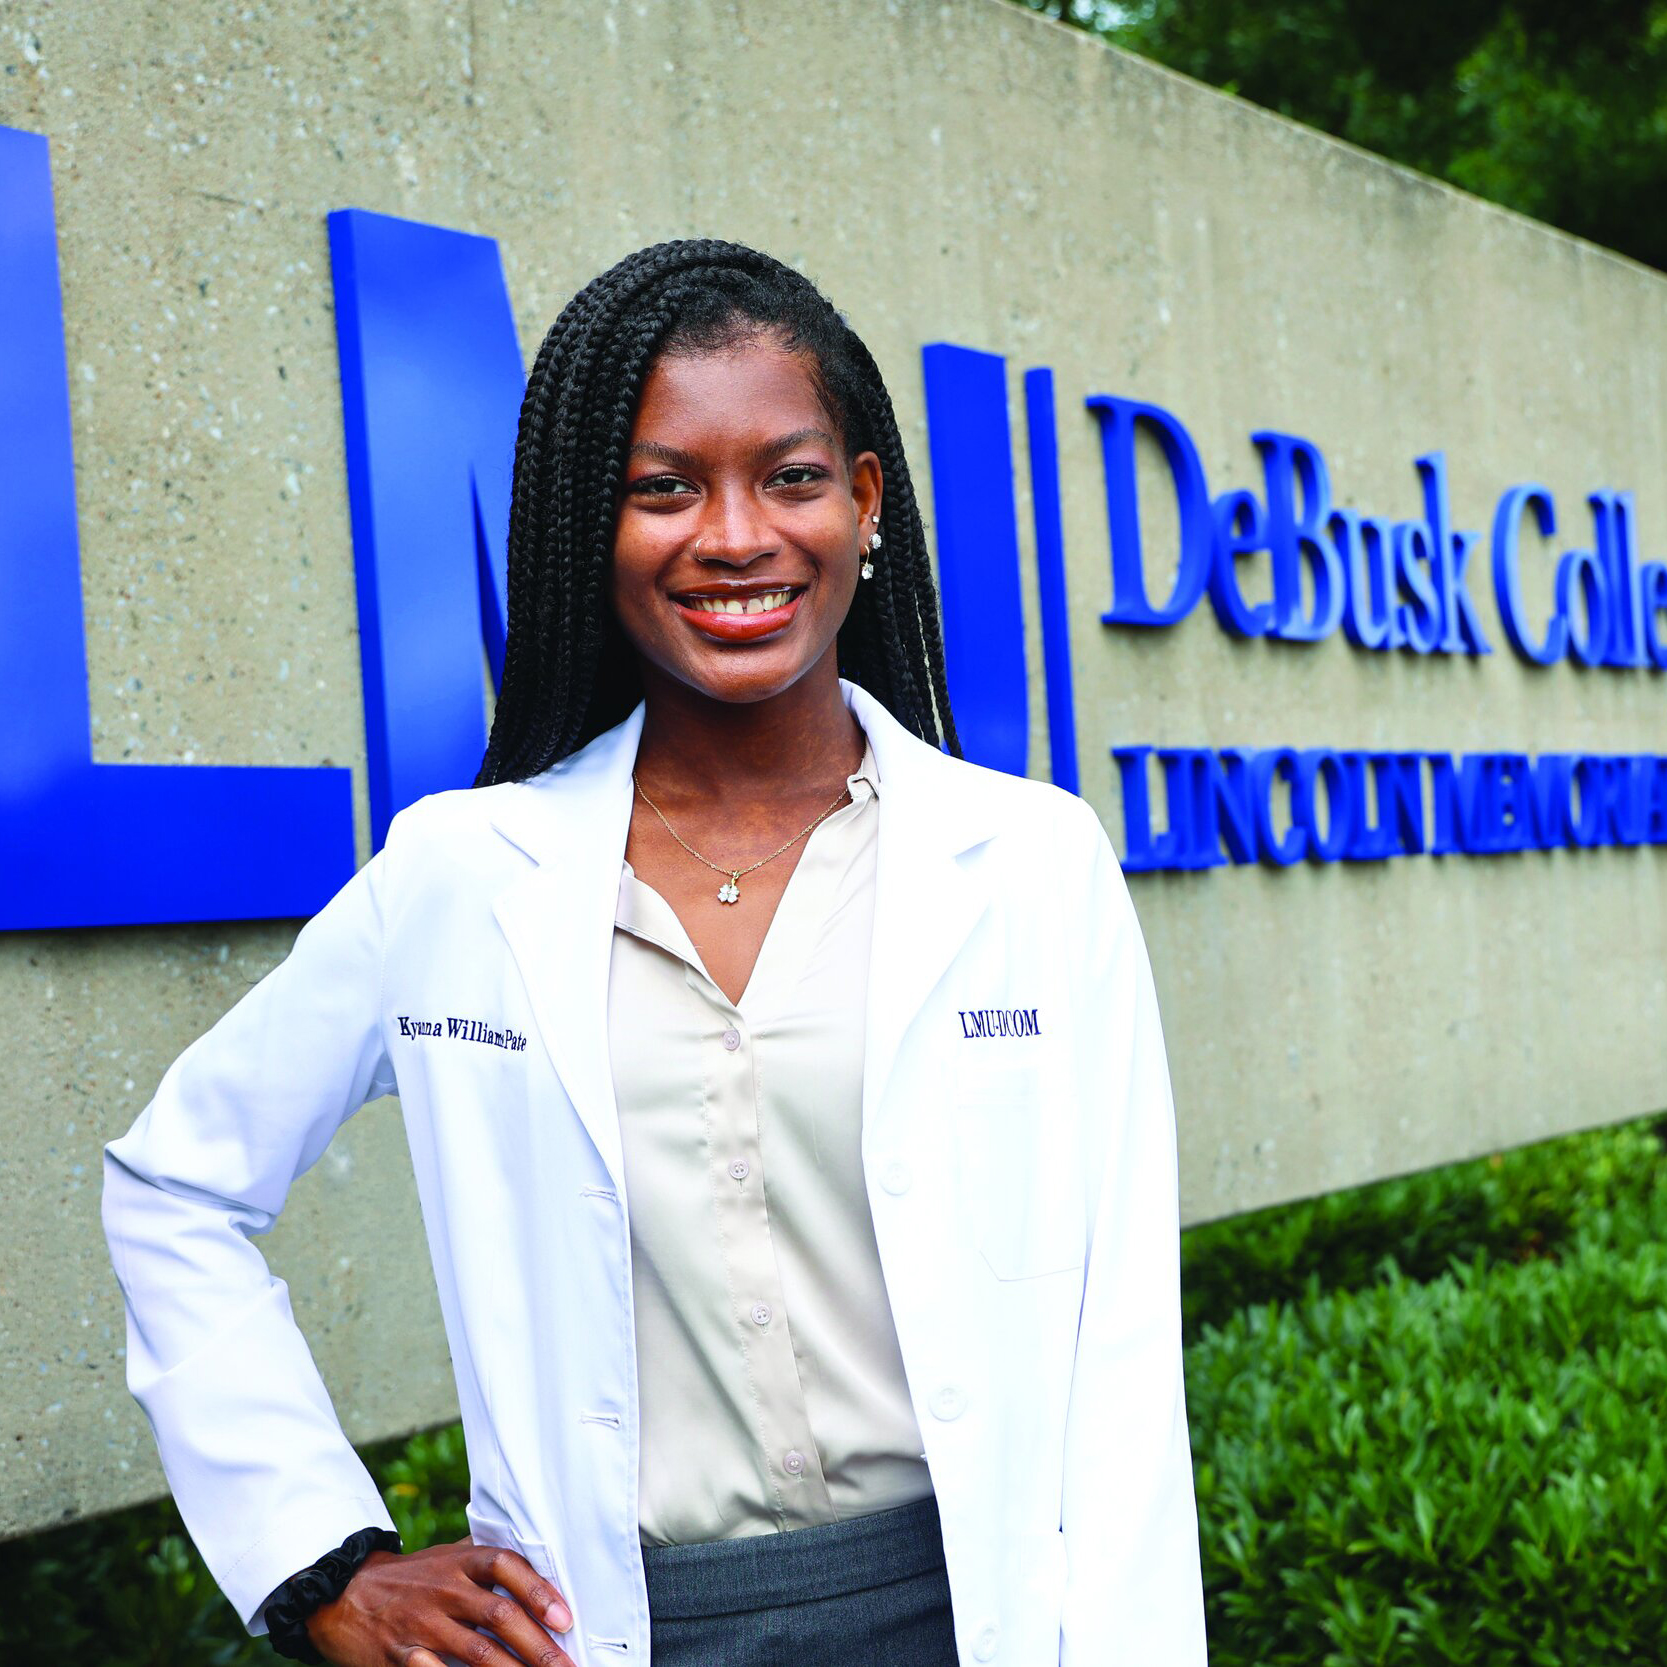 Providing the Key to Public Health: Alumnus Kyanna Williams-Pate brings advocacy to the forefront of healthcare